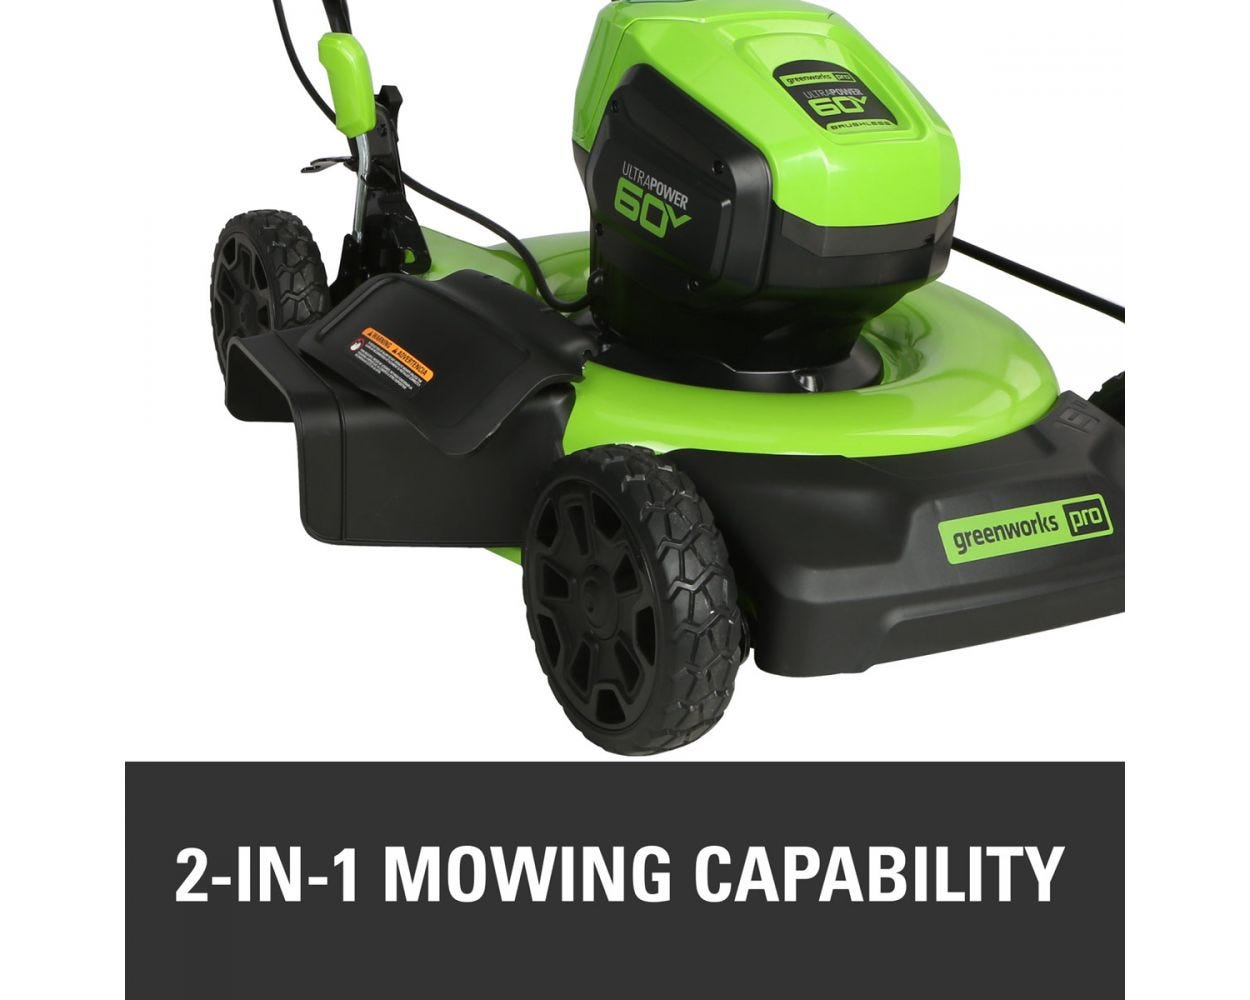 60V 19" Cordless Battery Push Lawn Mower w/ 5.0Ah Battery & Charger